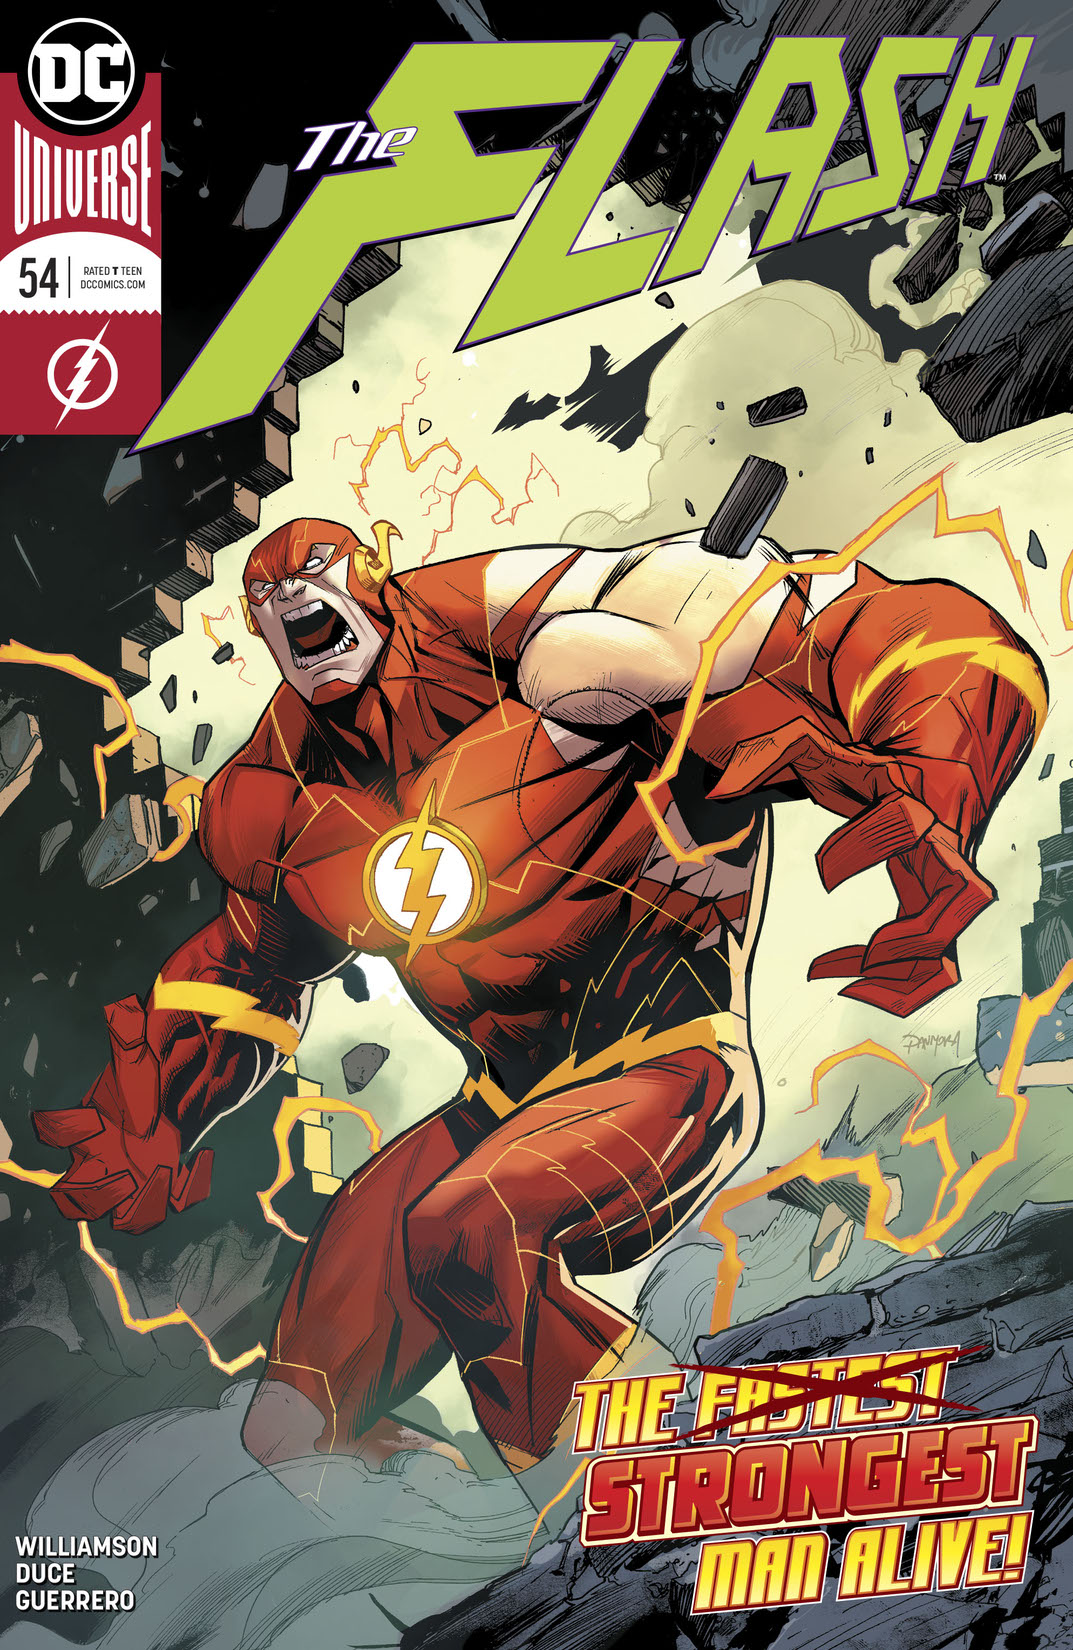 The Flash (2016-) #54 preview images